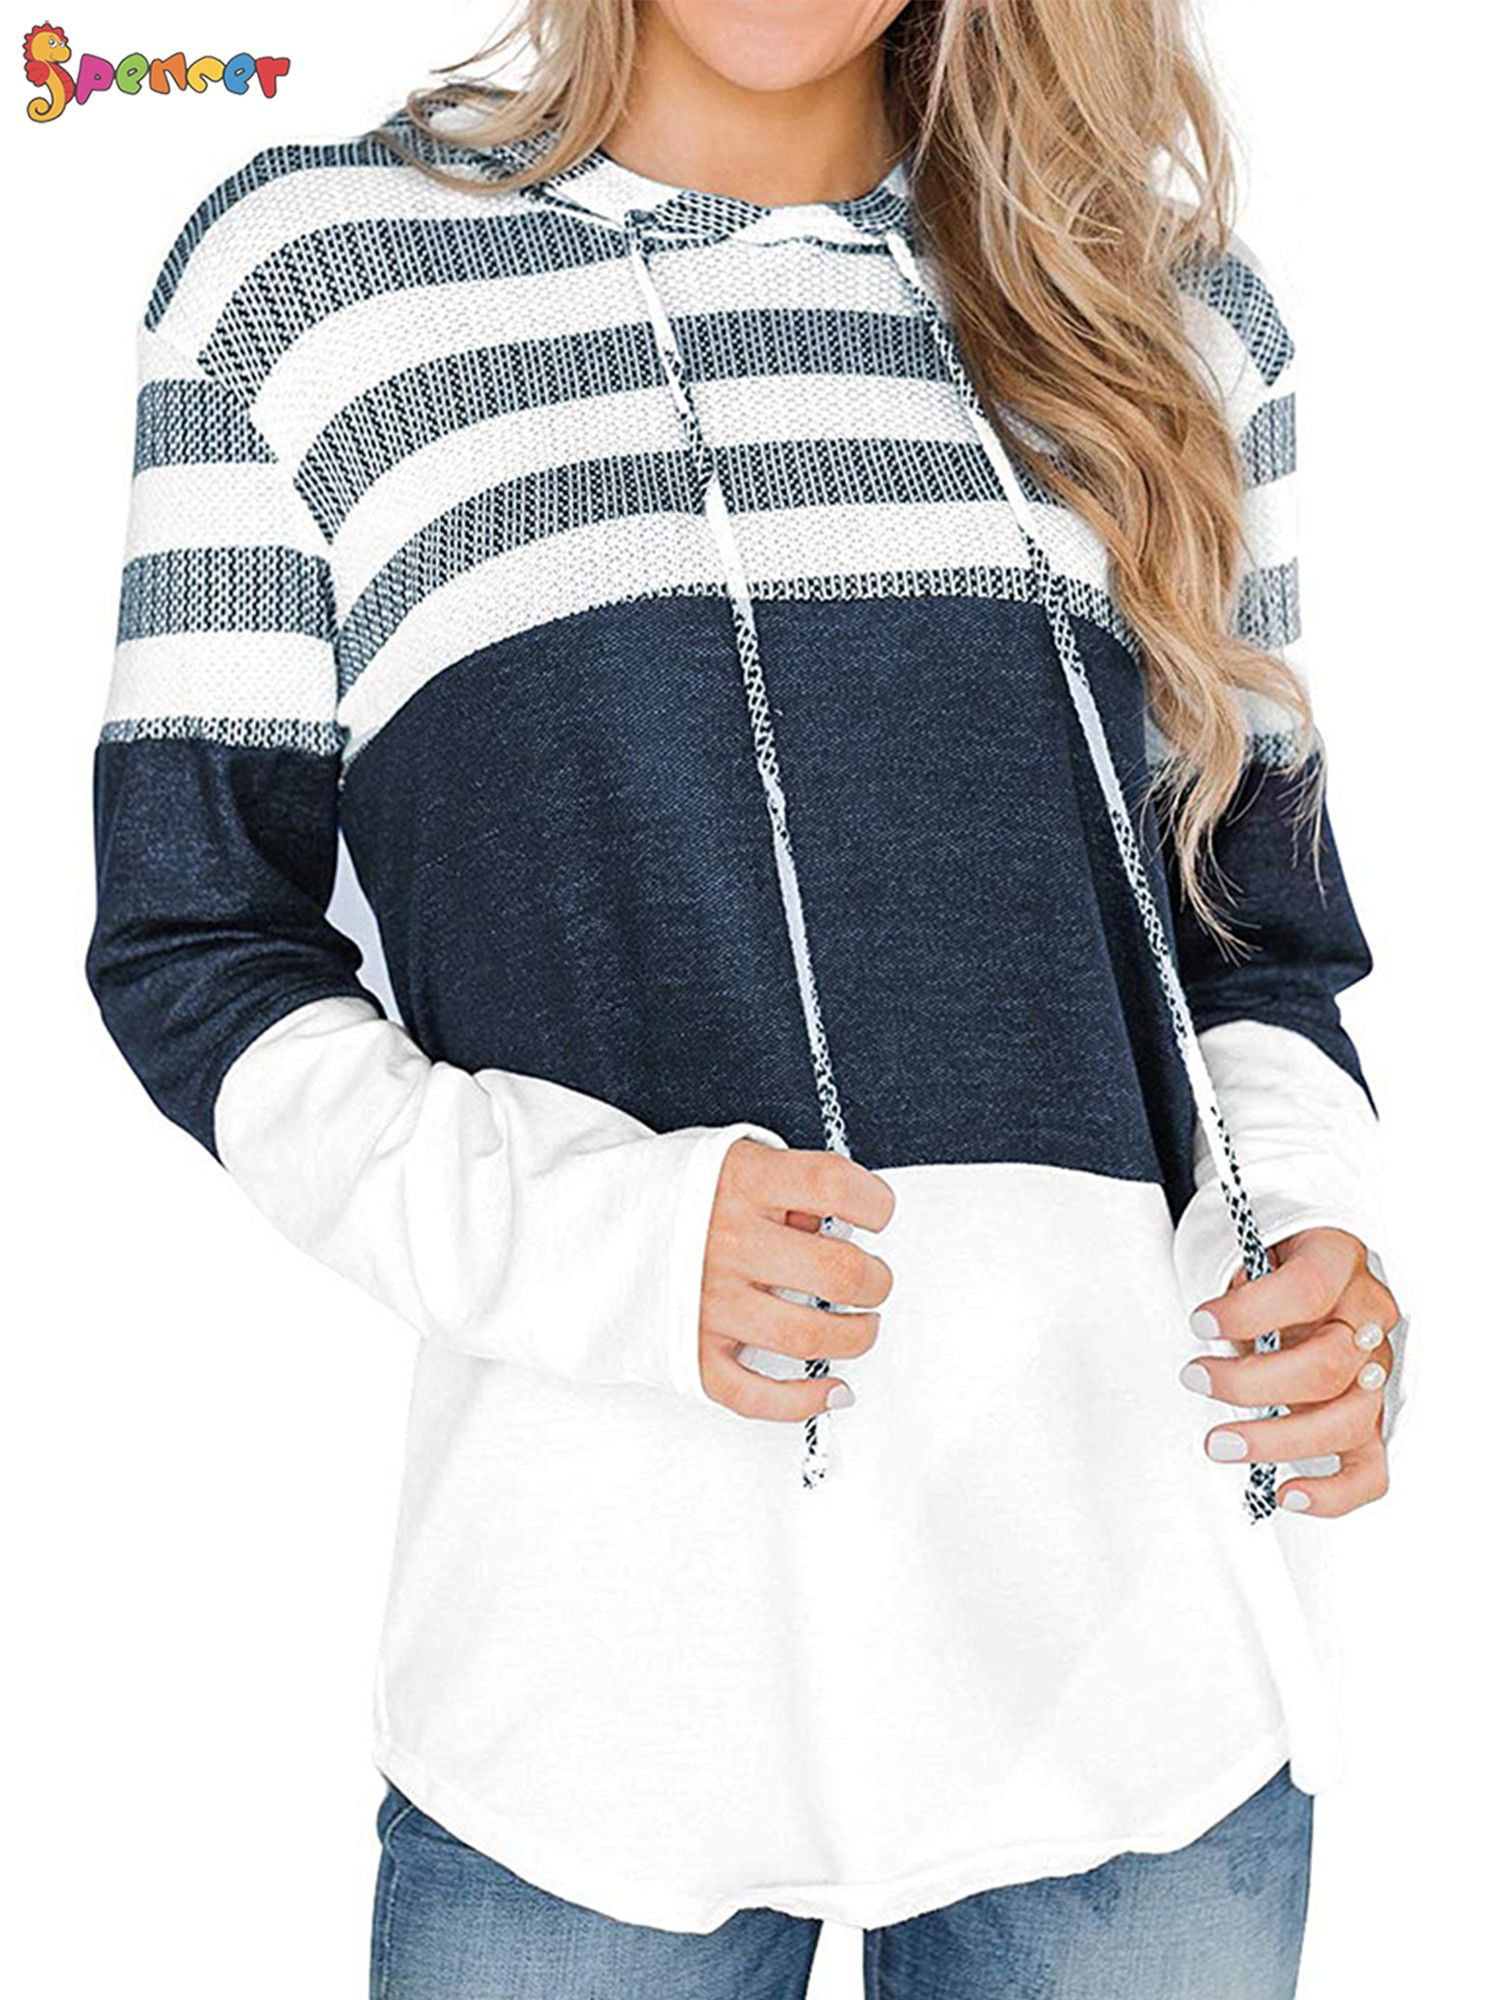 Spencer Women's Striped Color Block Long Sleeve Hoodies Pullover Casual ...